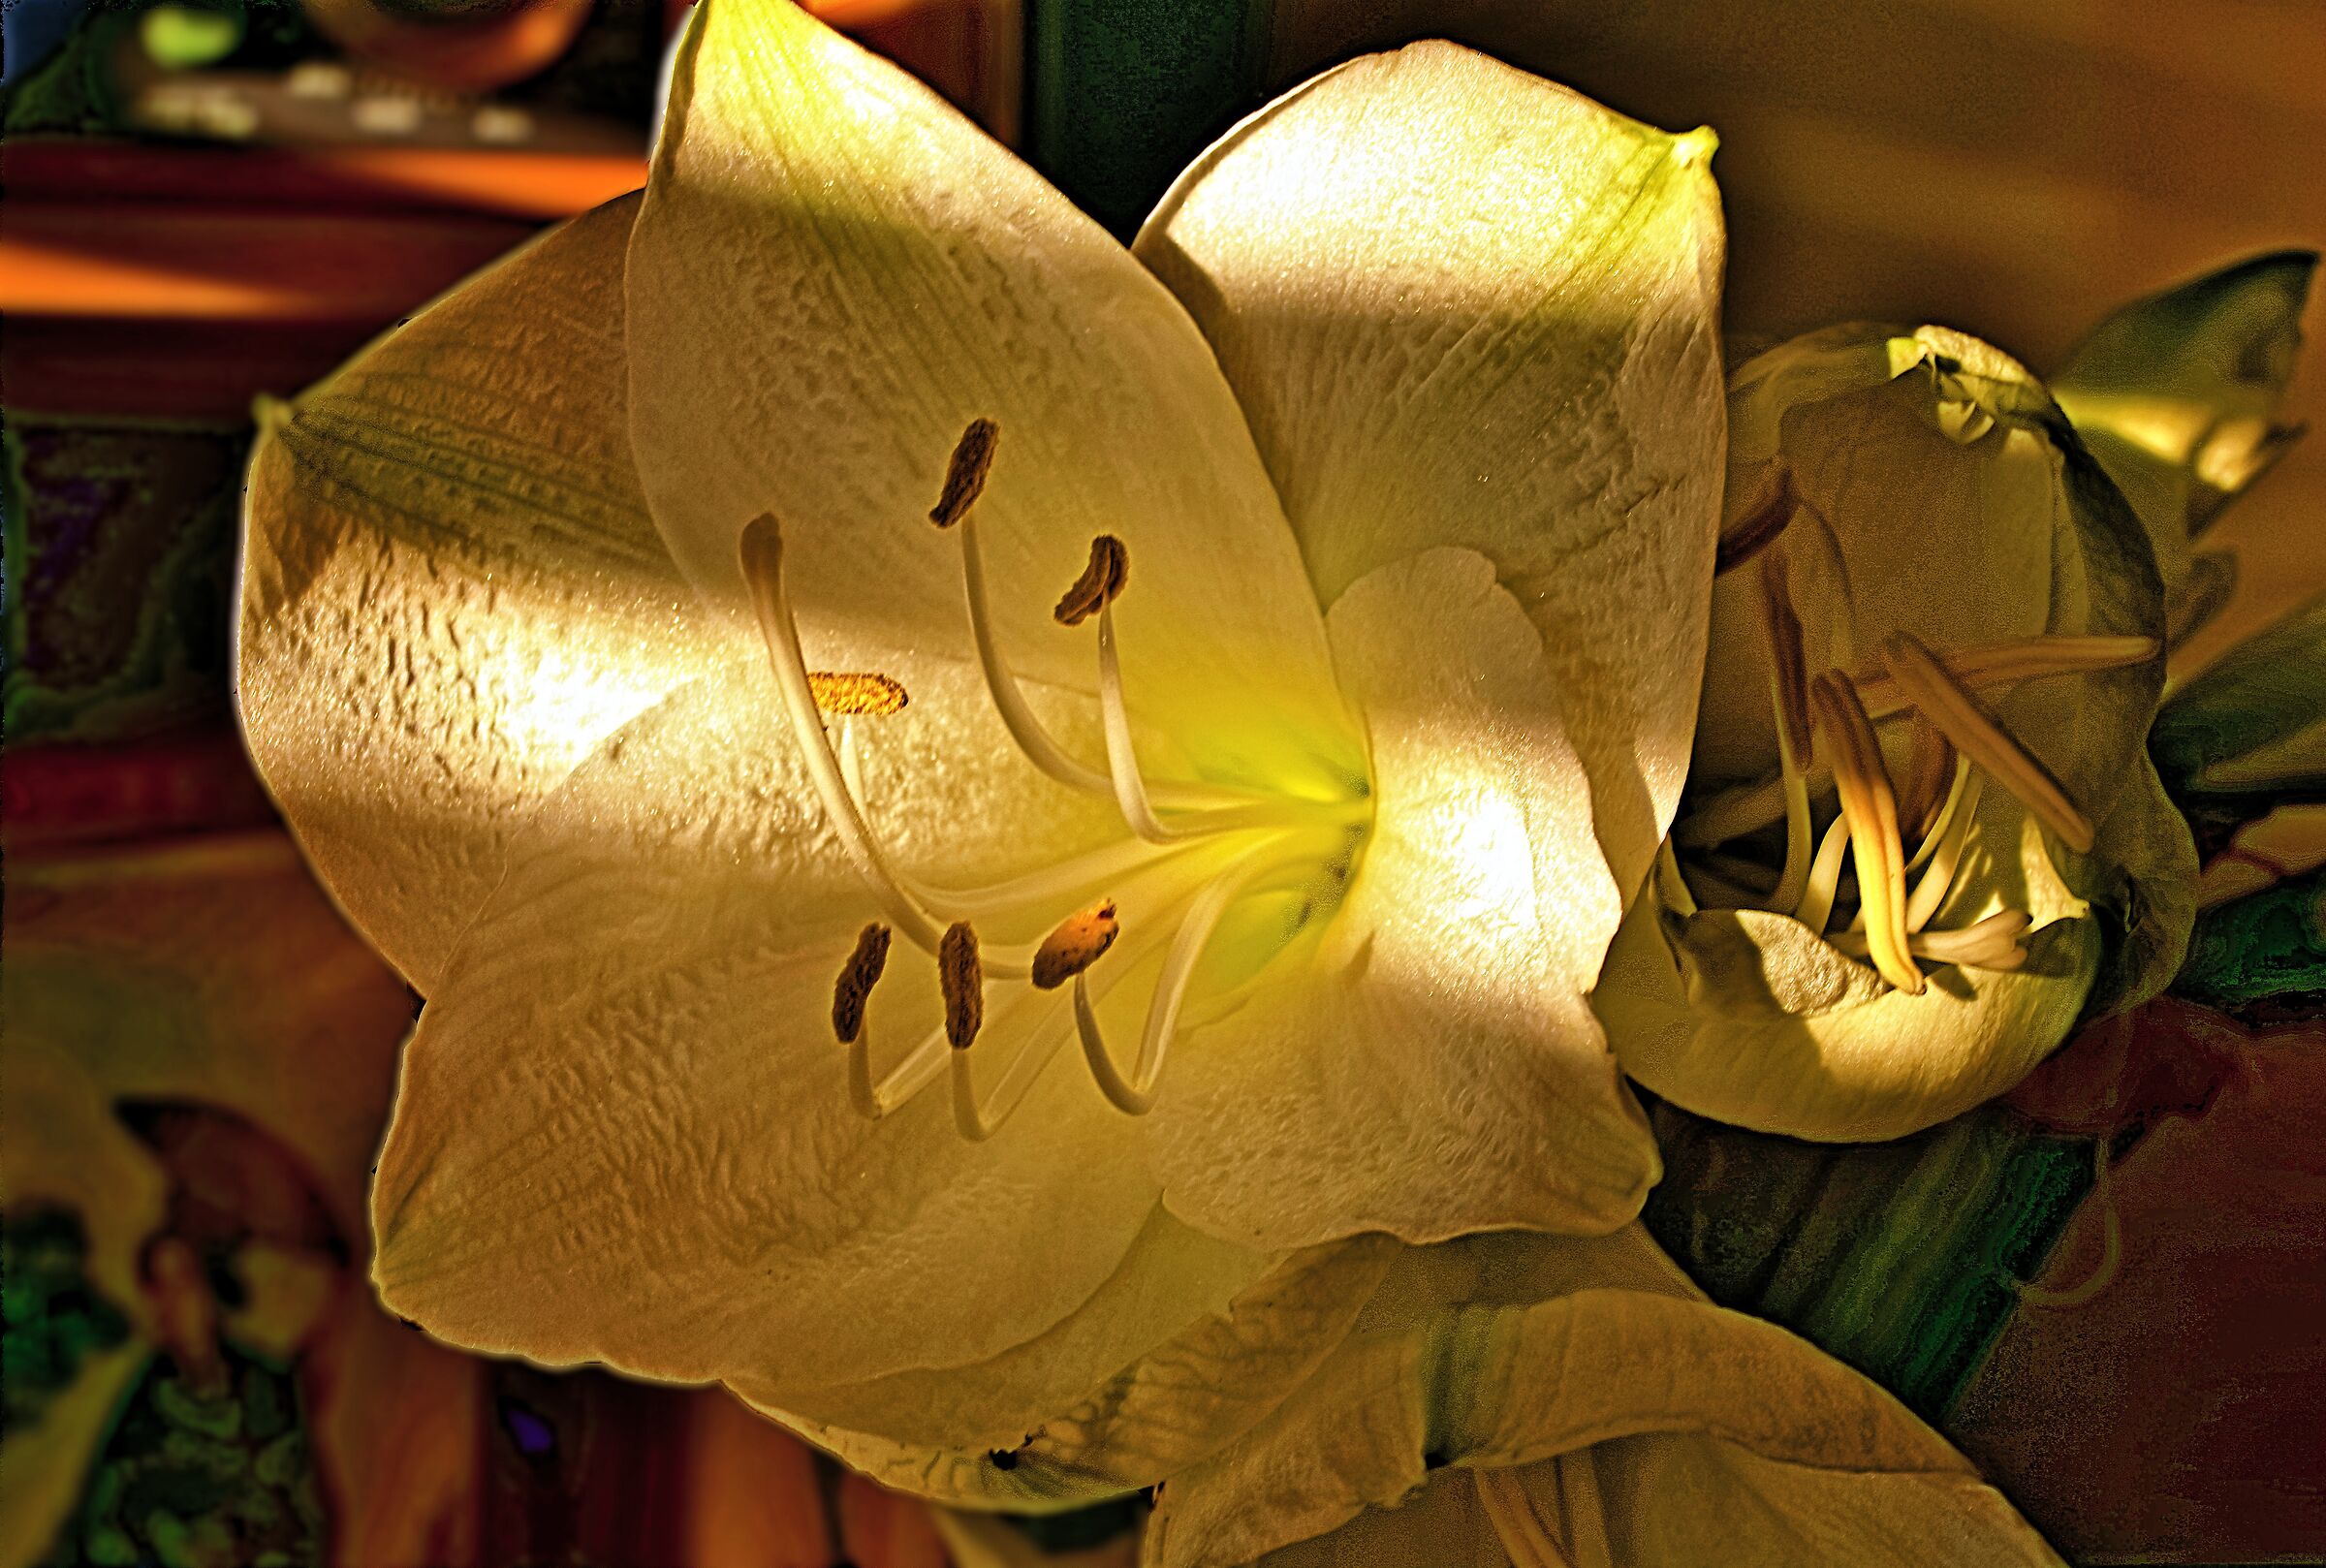 The light in bloom...